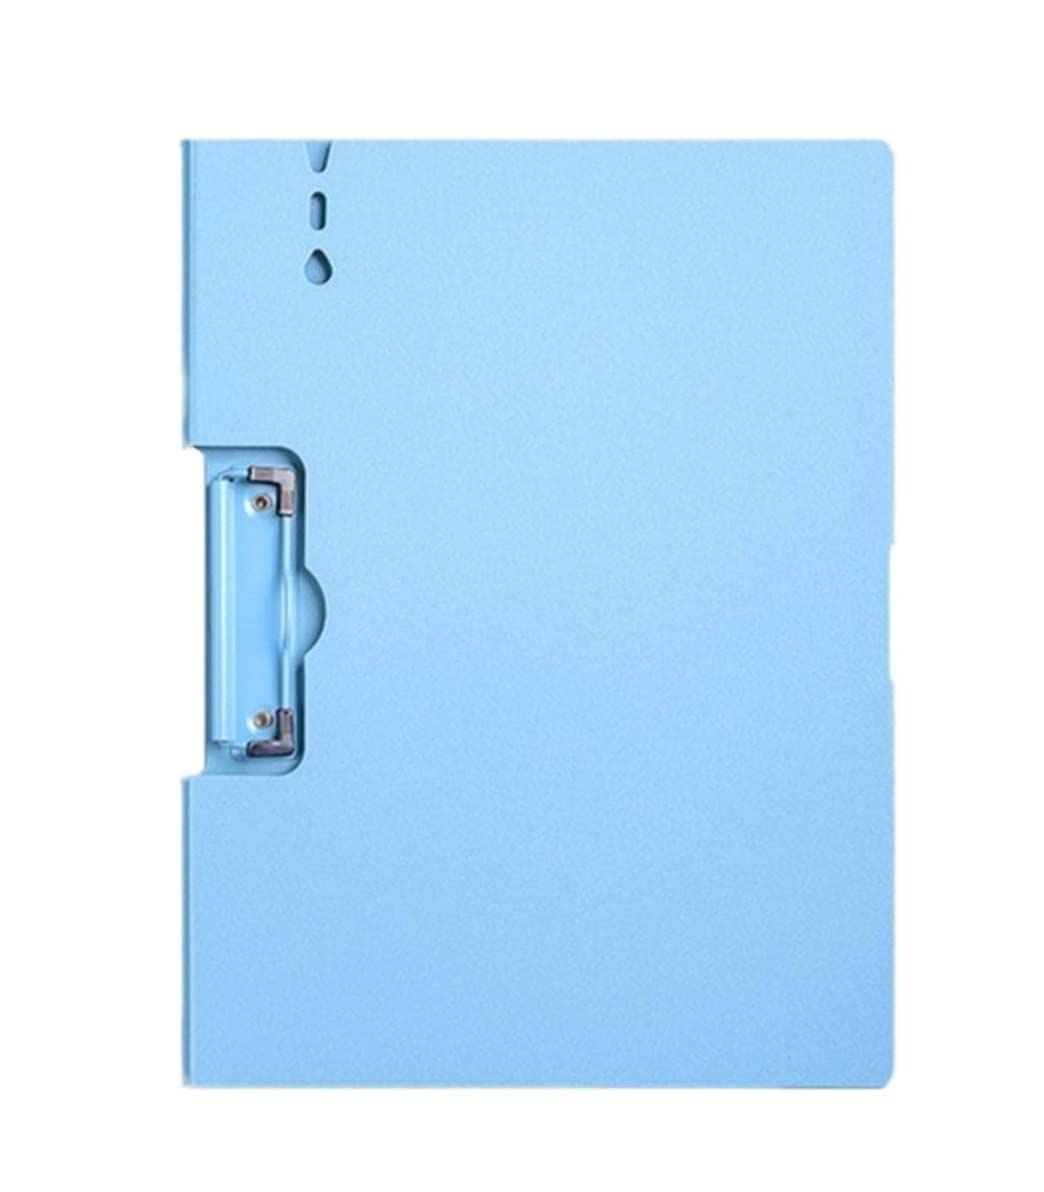 File folder with a lock